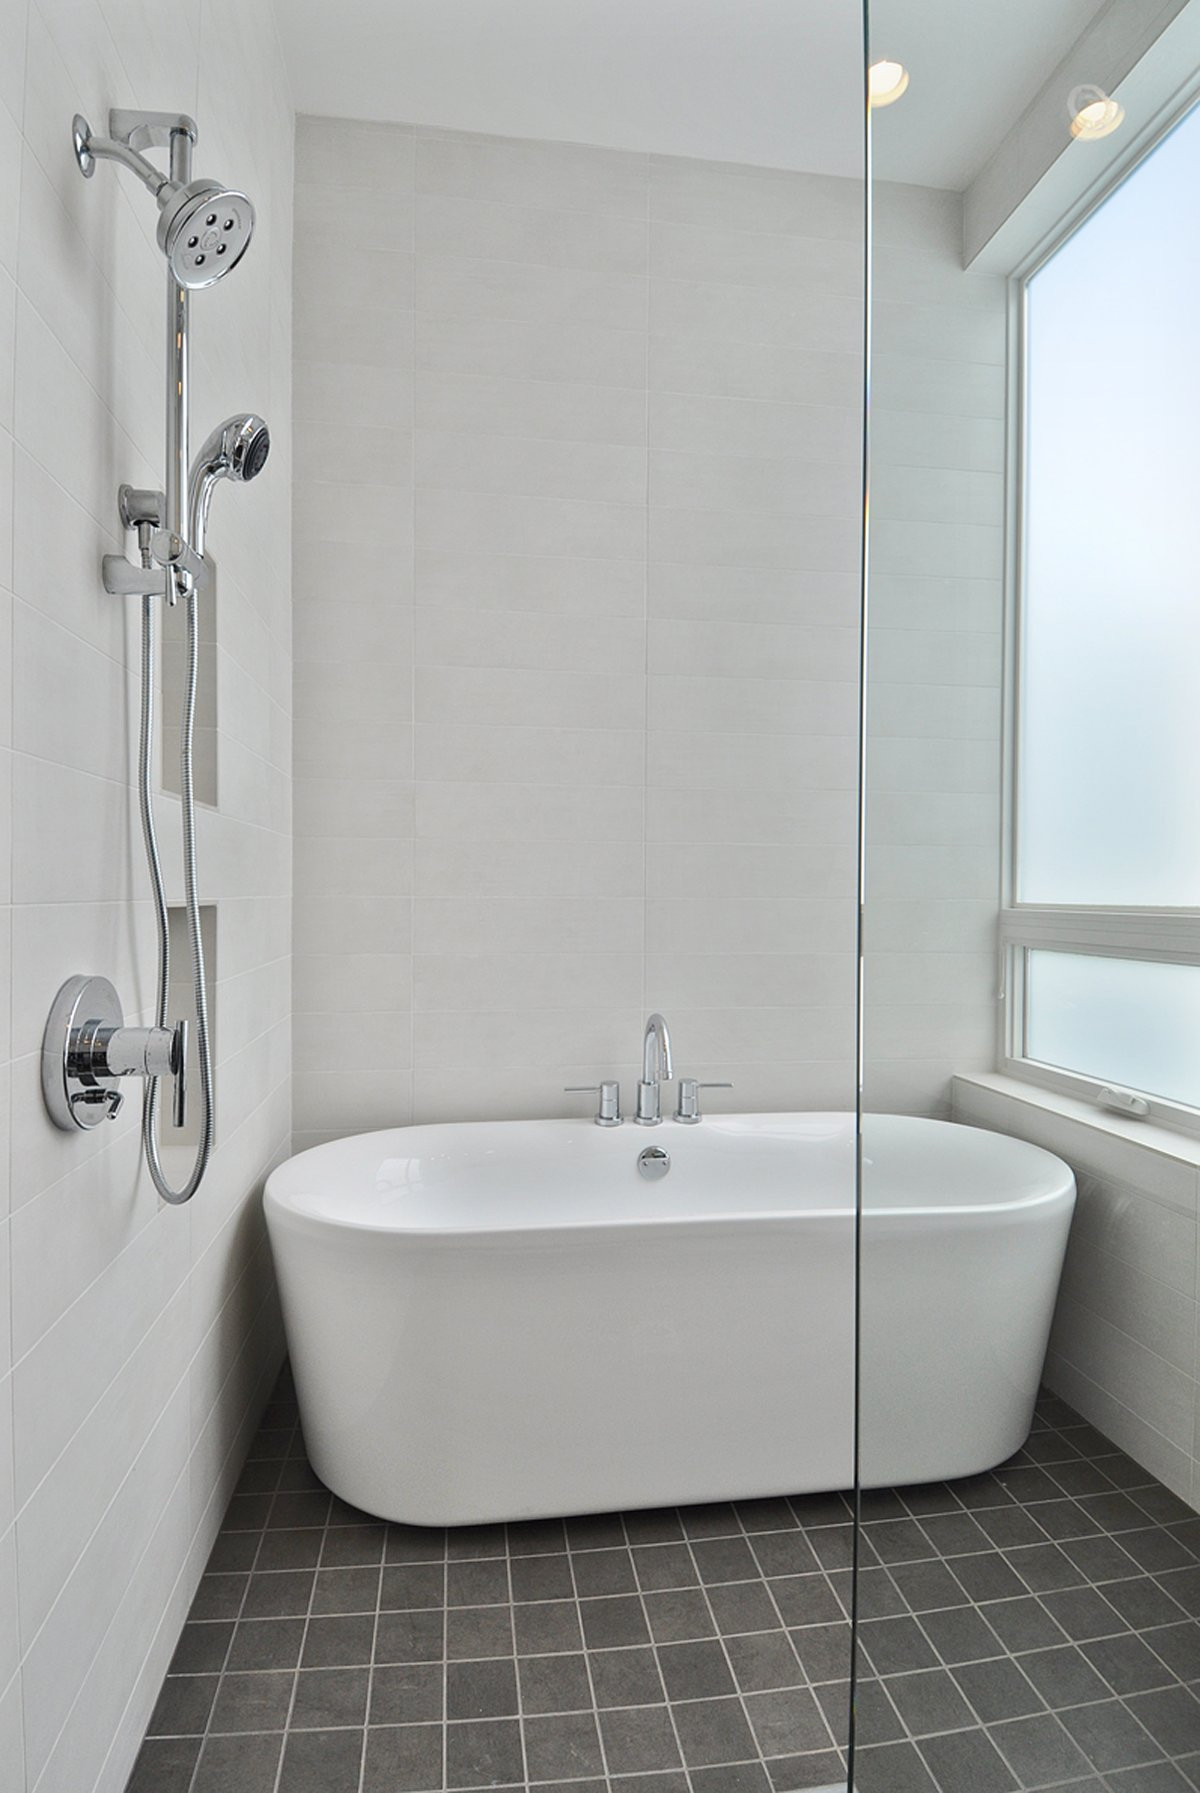 Freestanding Tub In Small Bathroom
 Perfect Small Bathtubs With Shower Inspirations